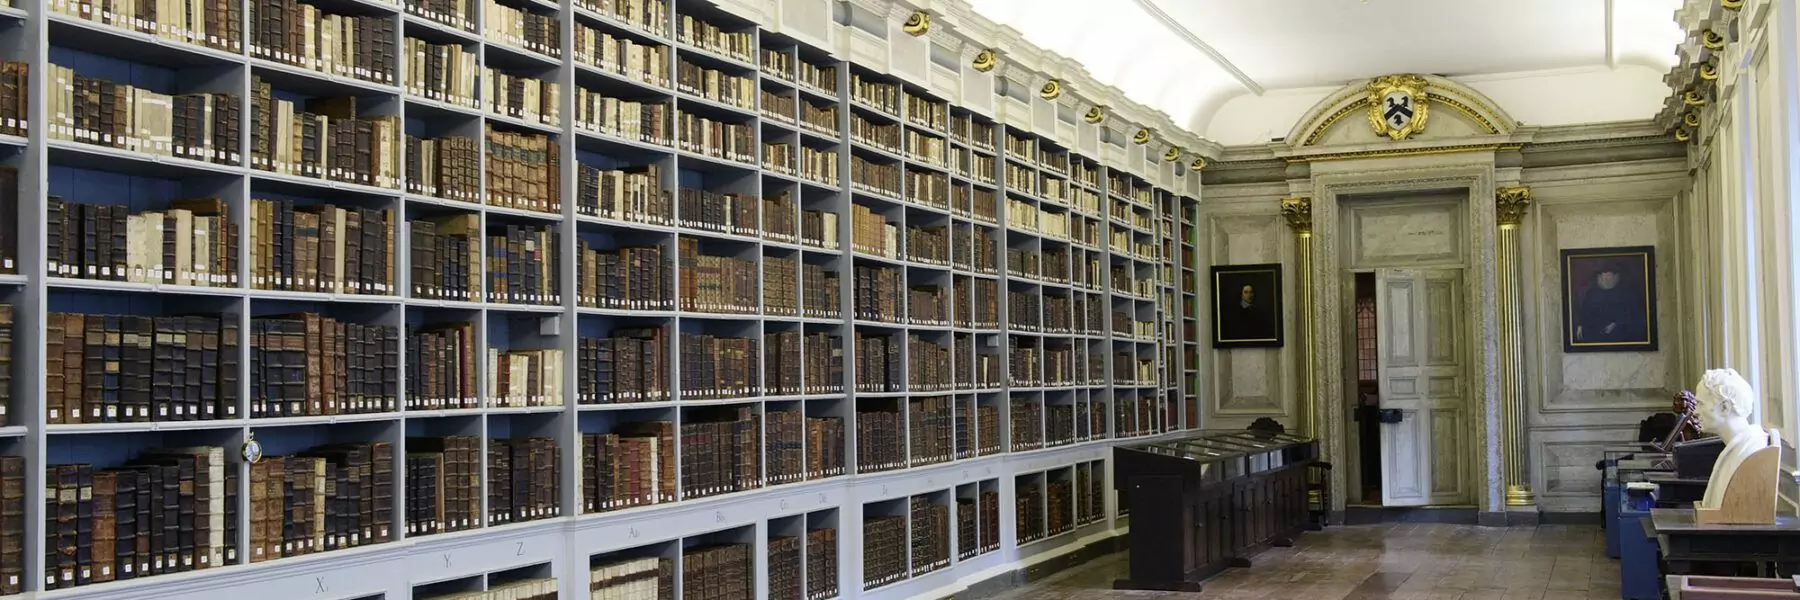 Lincoln Cathedral Library